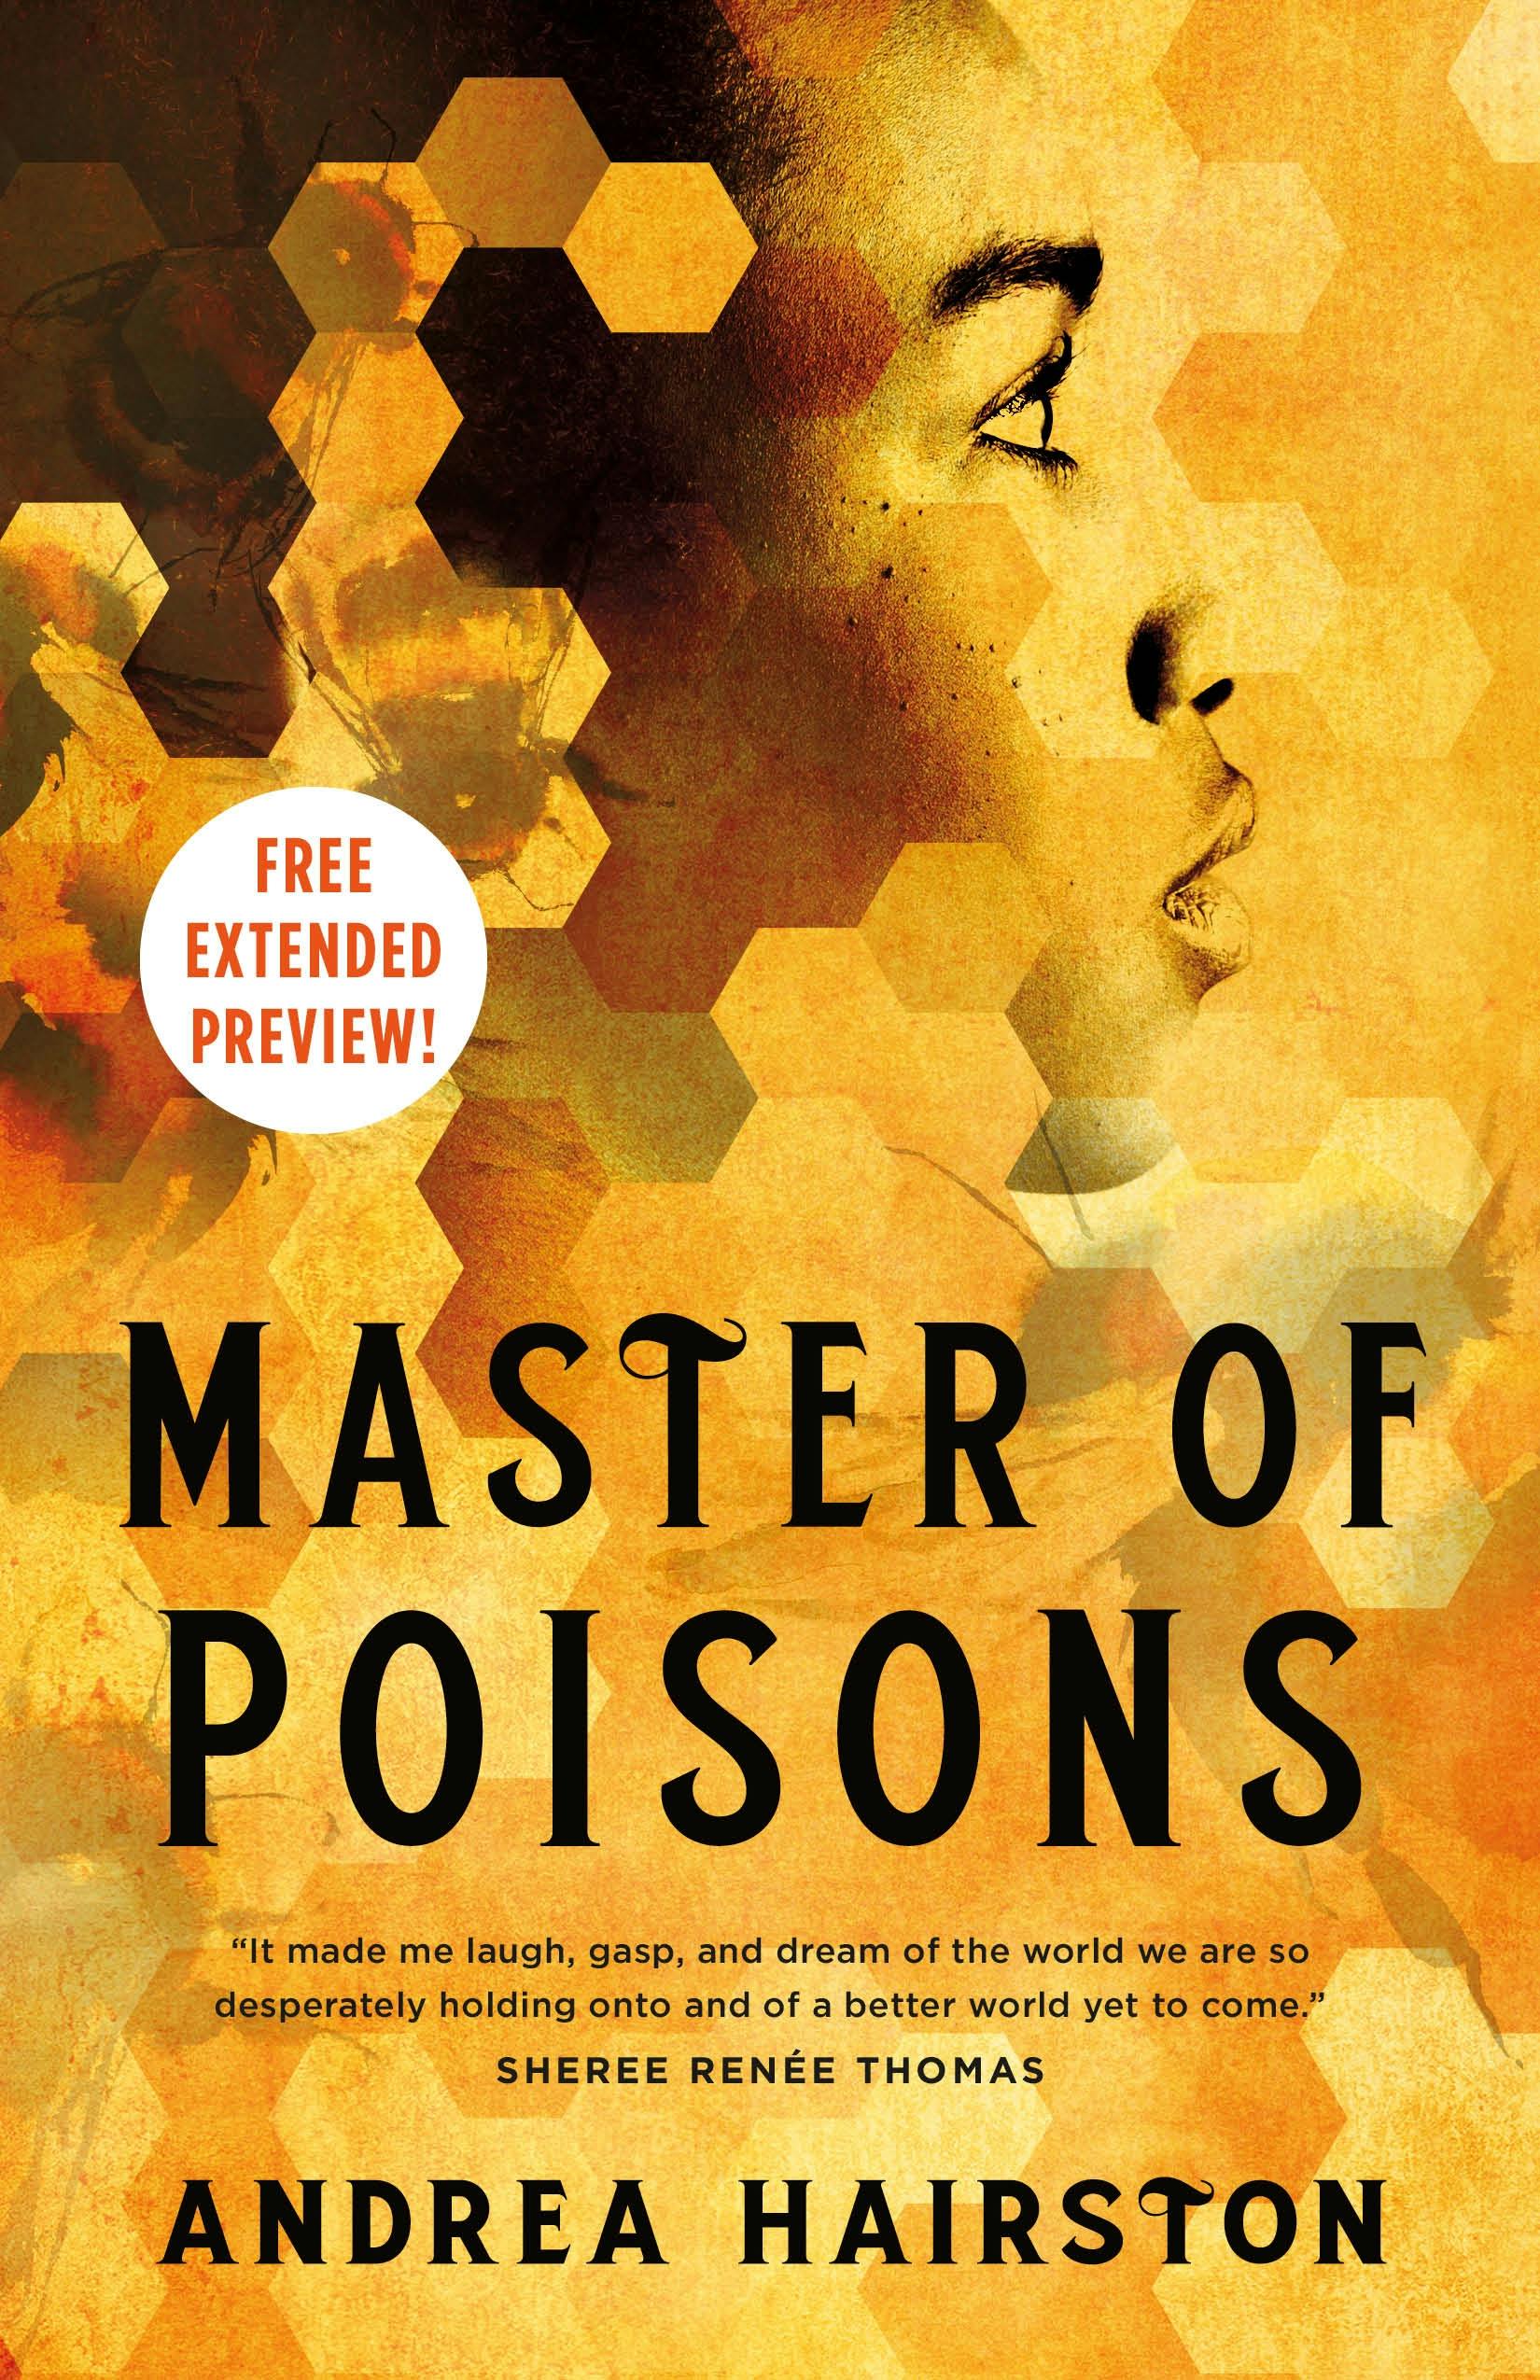 Cover for the book titled as: Master of Poisons Sneak Peek